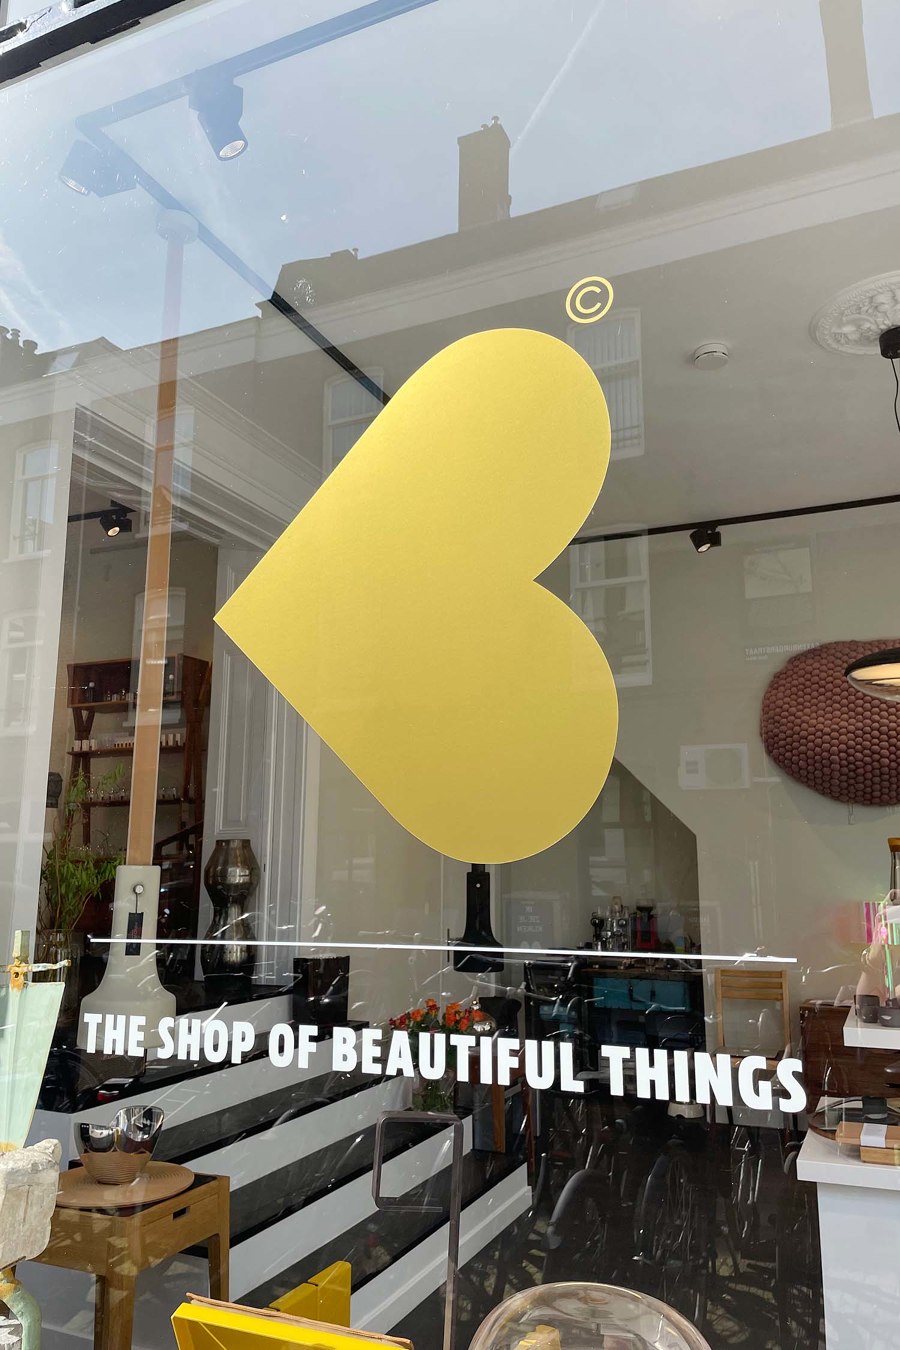 The Shop of Beautiful Things